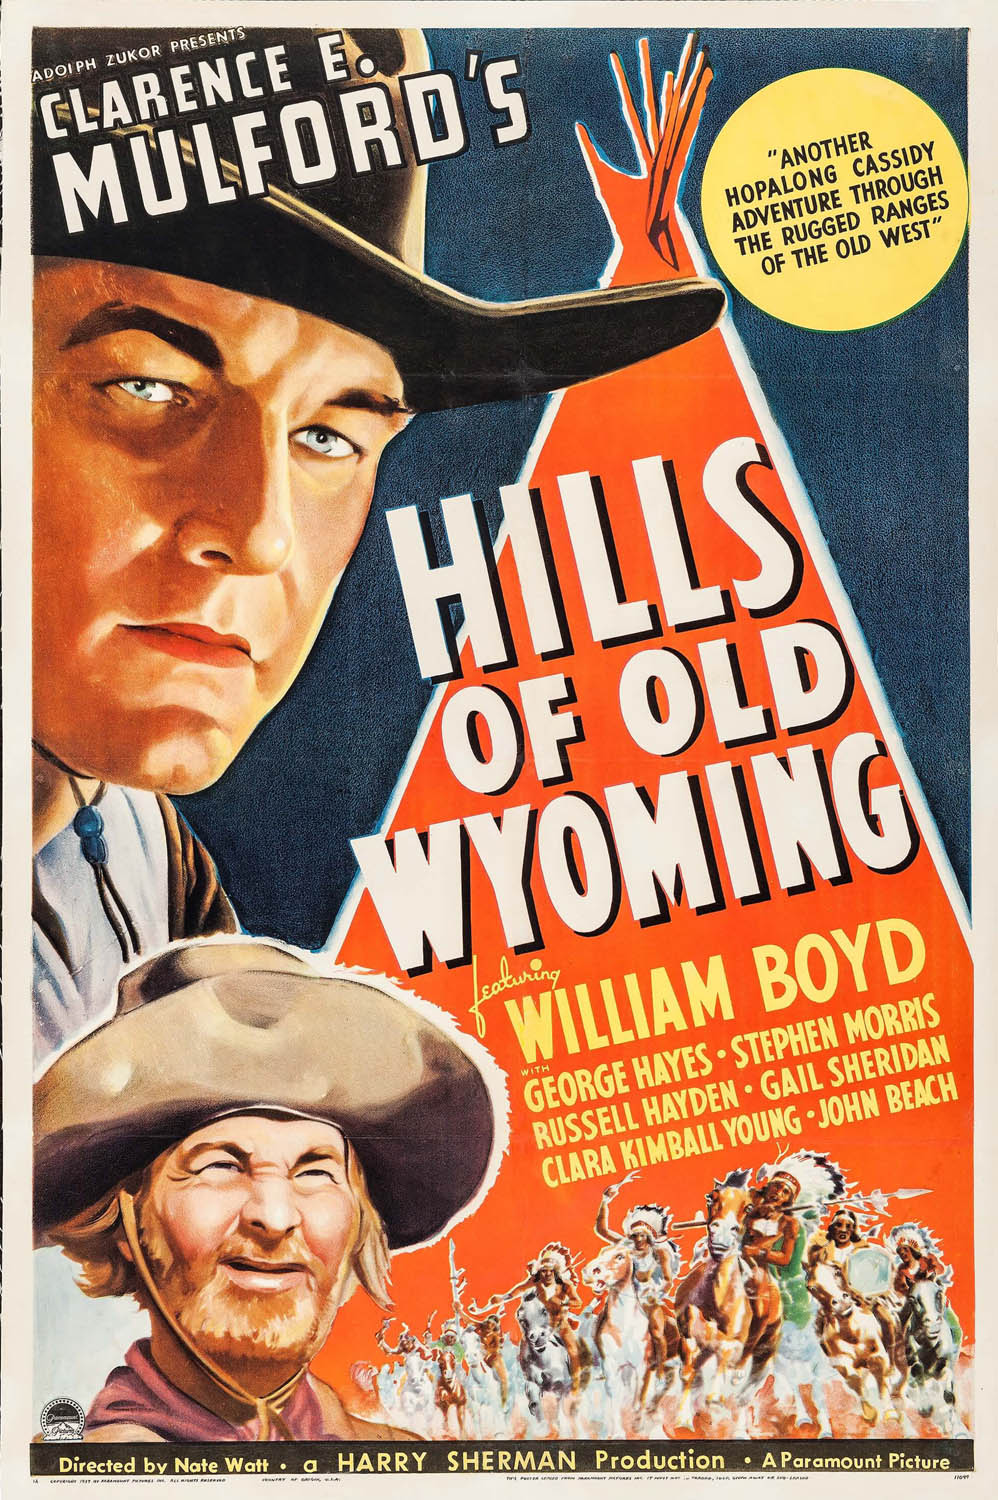 HILLS OF OLD WYOMING